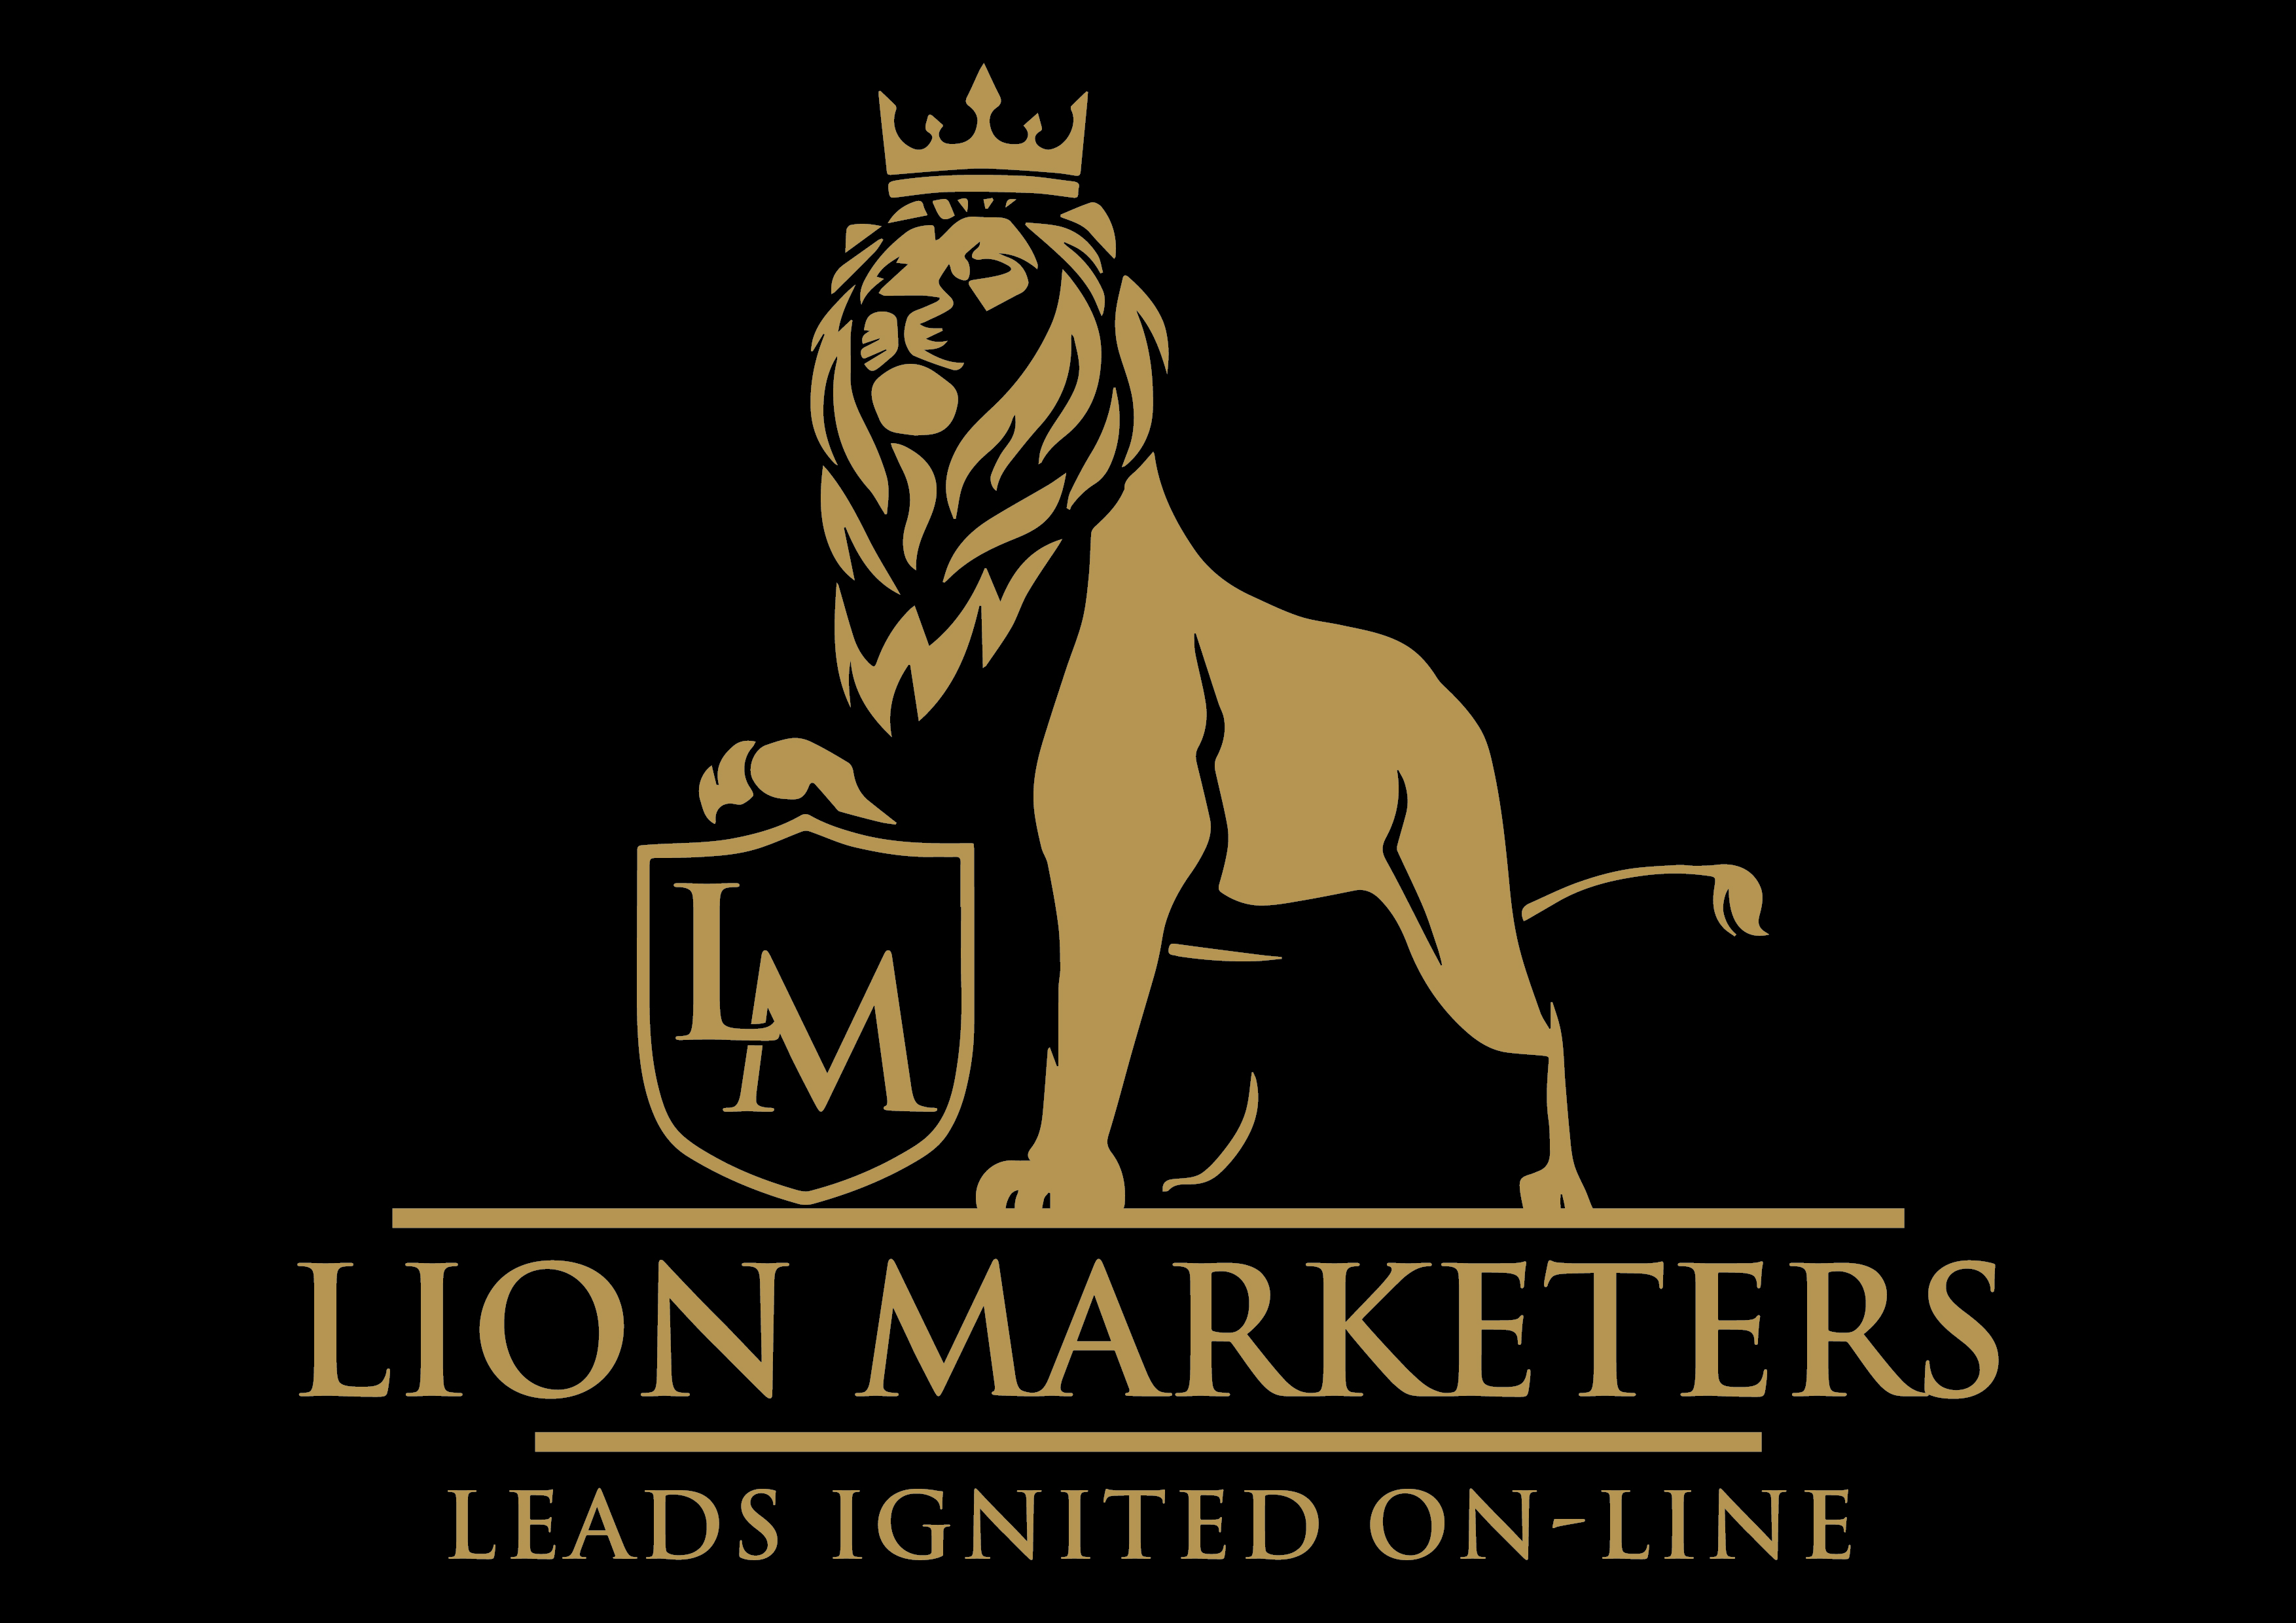 Lion Marketers Rises to the Top of the Real Estate Marketing Industry